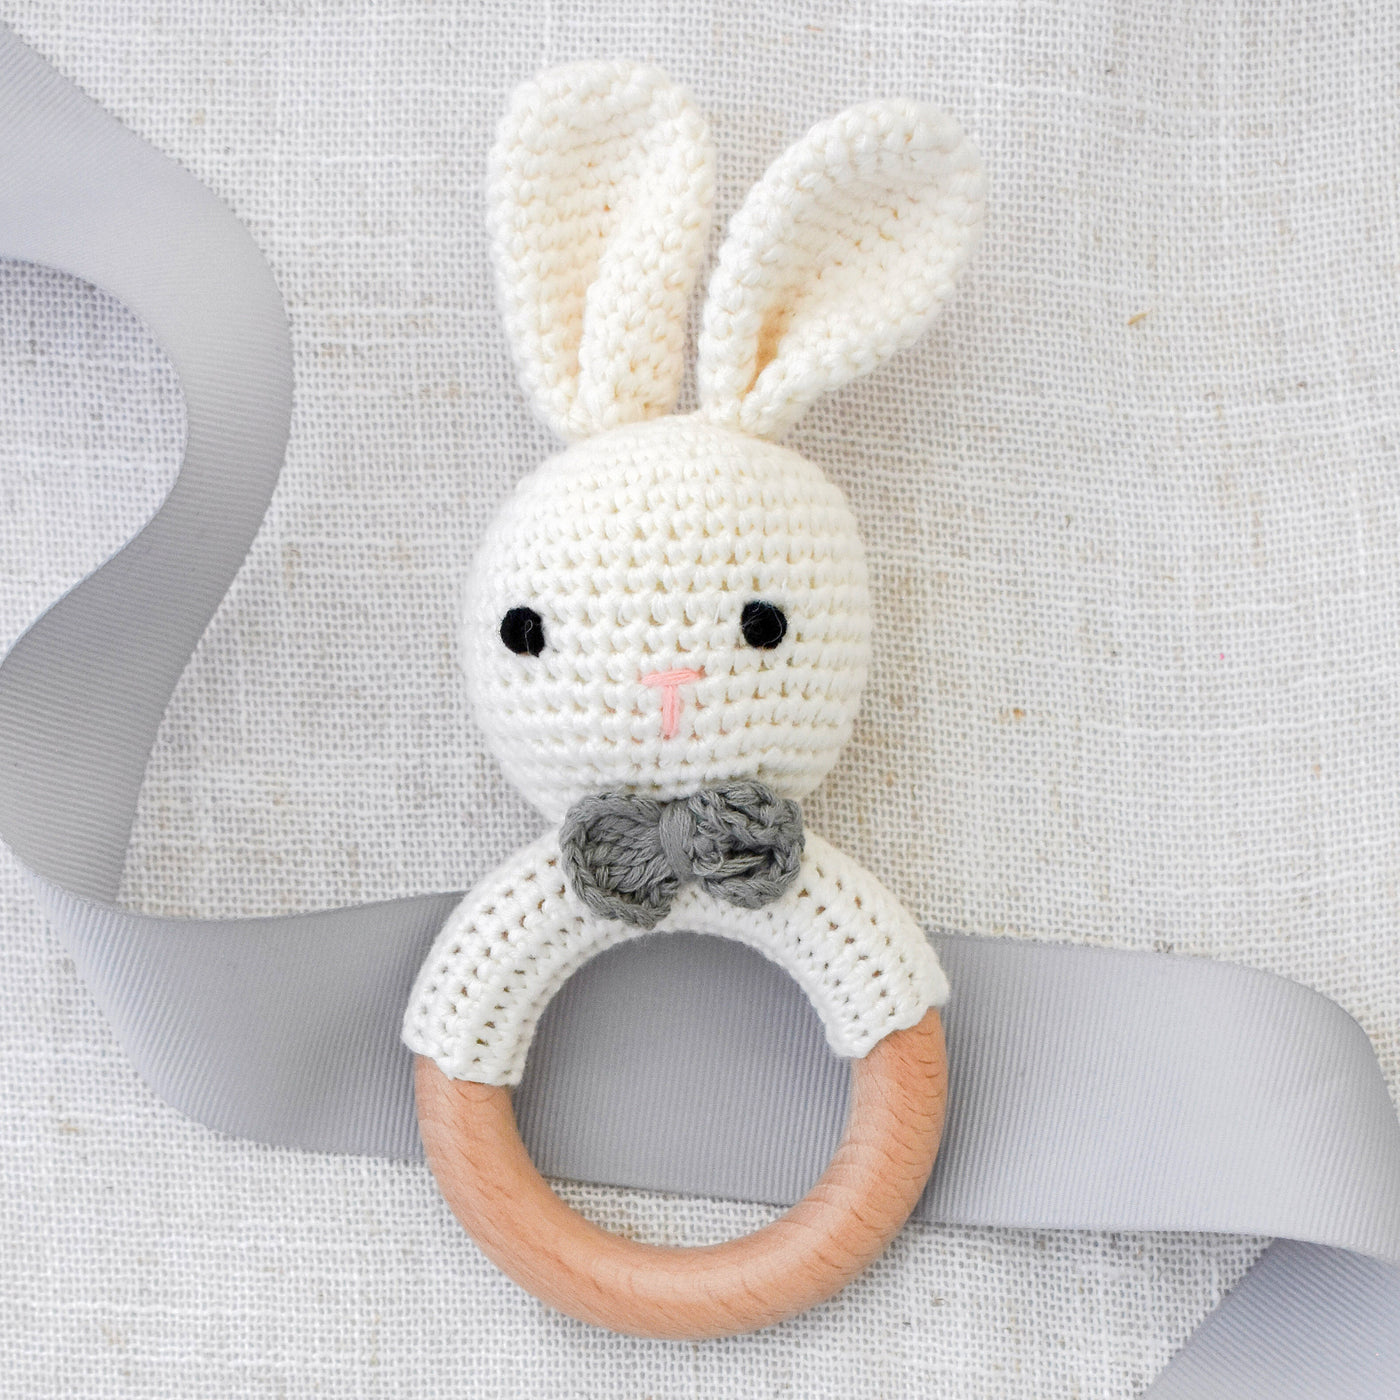 Baby and me gift box. Close up of Crochet Bunny Rattle